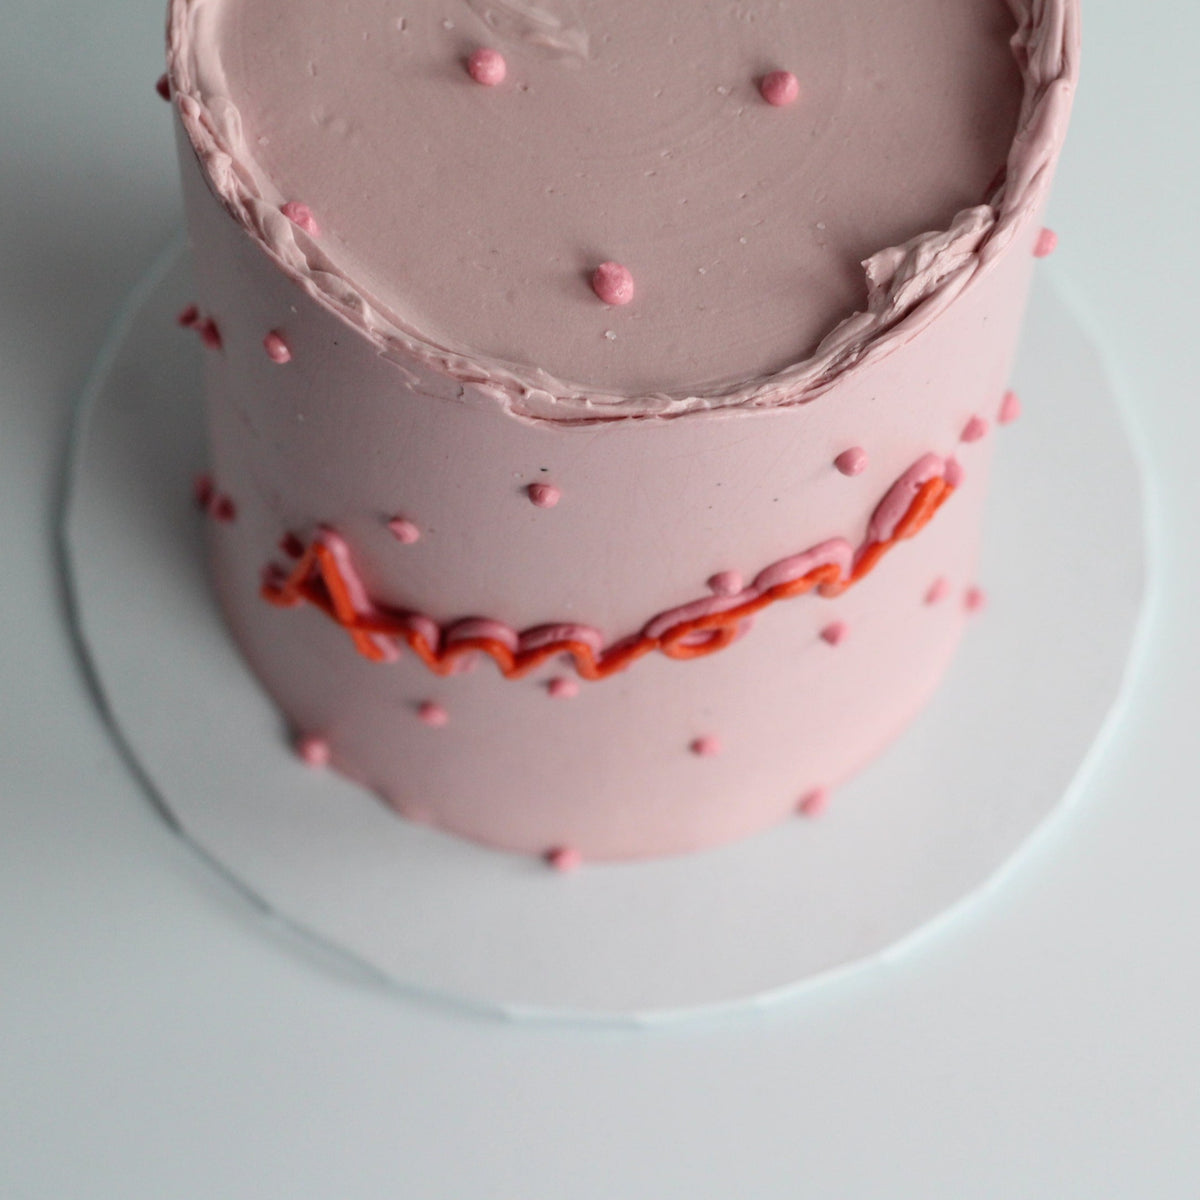 Celebrate love with our pink AMORE cake!